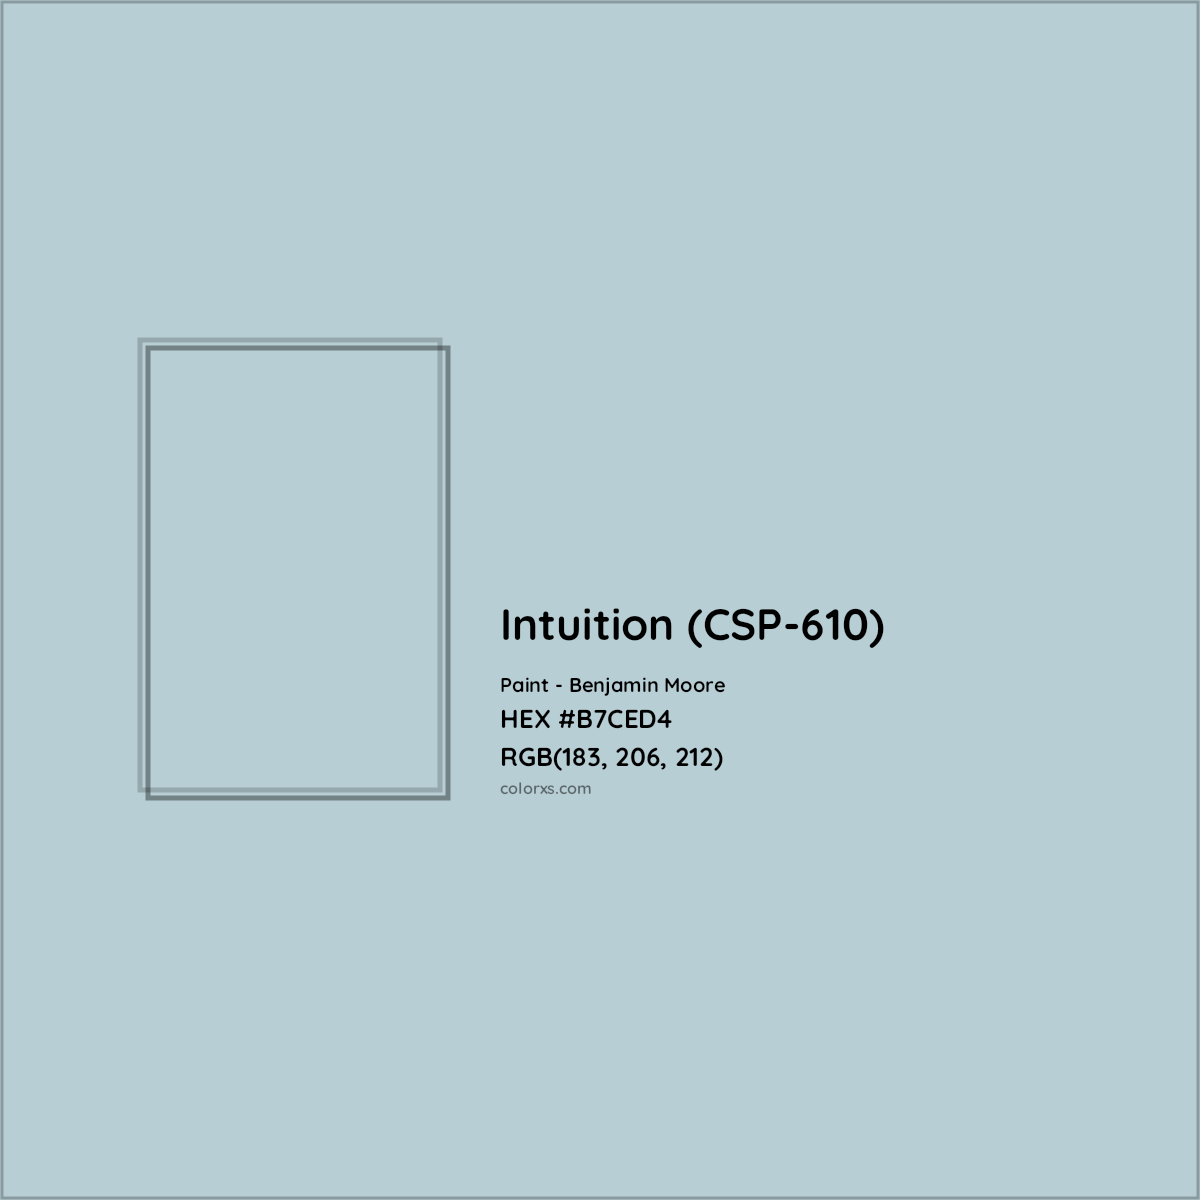 HEX #B7CED4 Intuition (CSP-610) Paint Benjamin Moore - Color Code